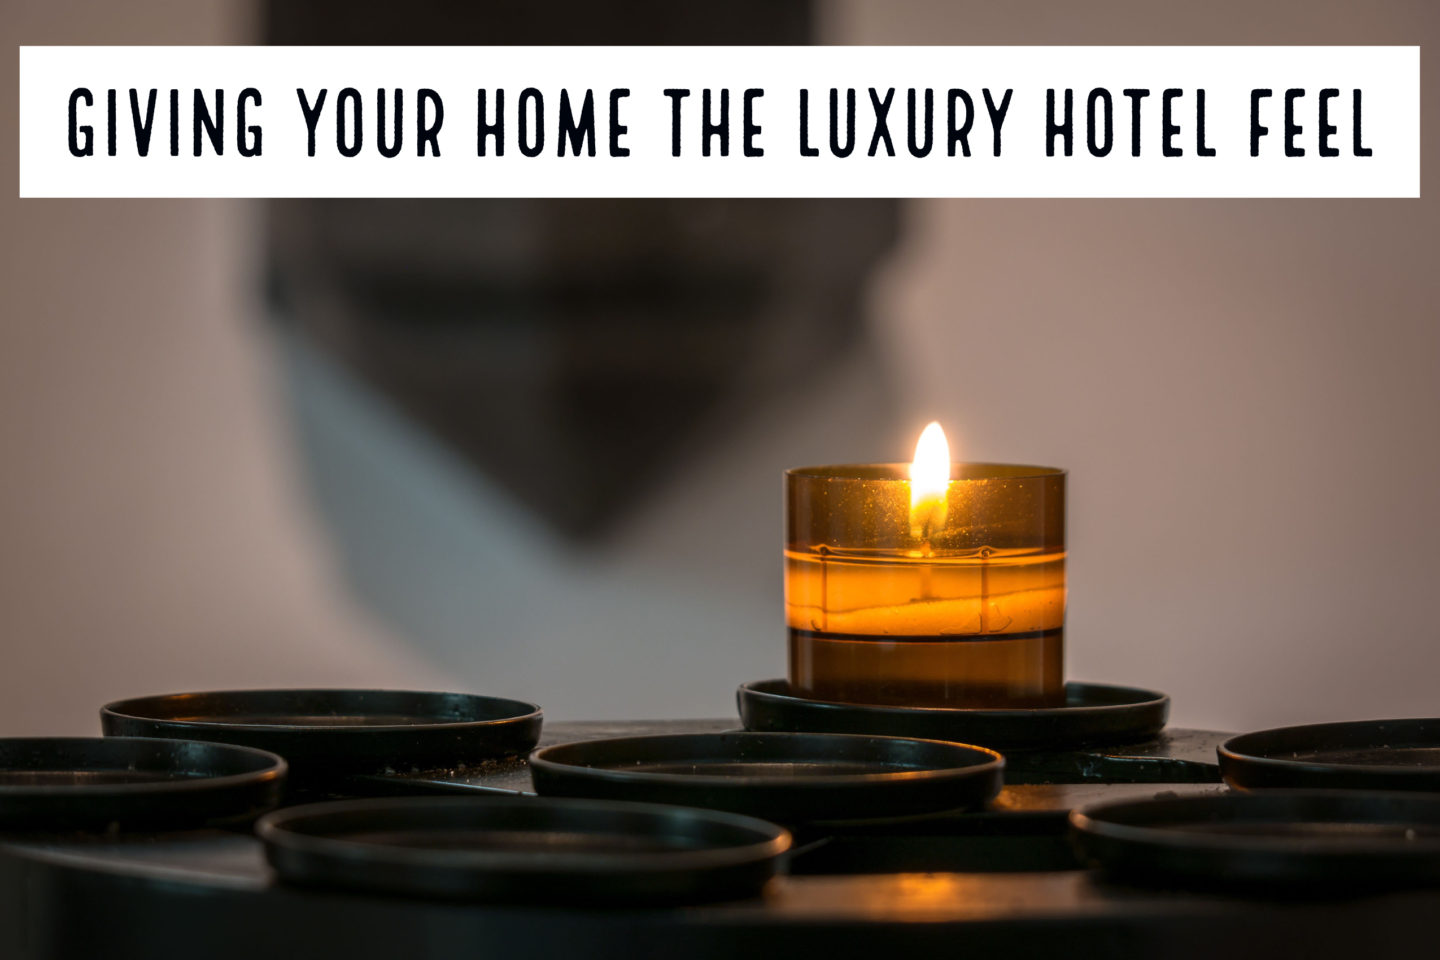 Interiors // Giving Your Home the Luxury Hotel Feel